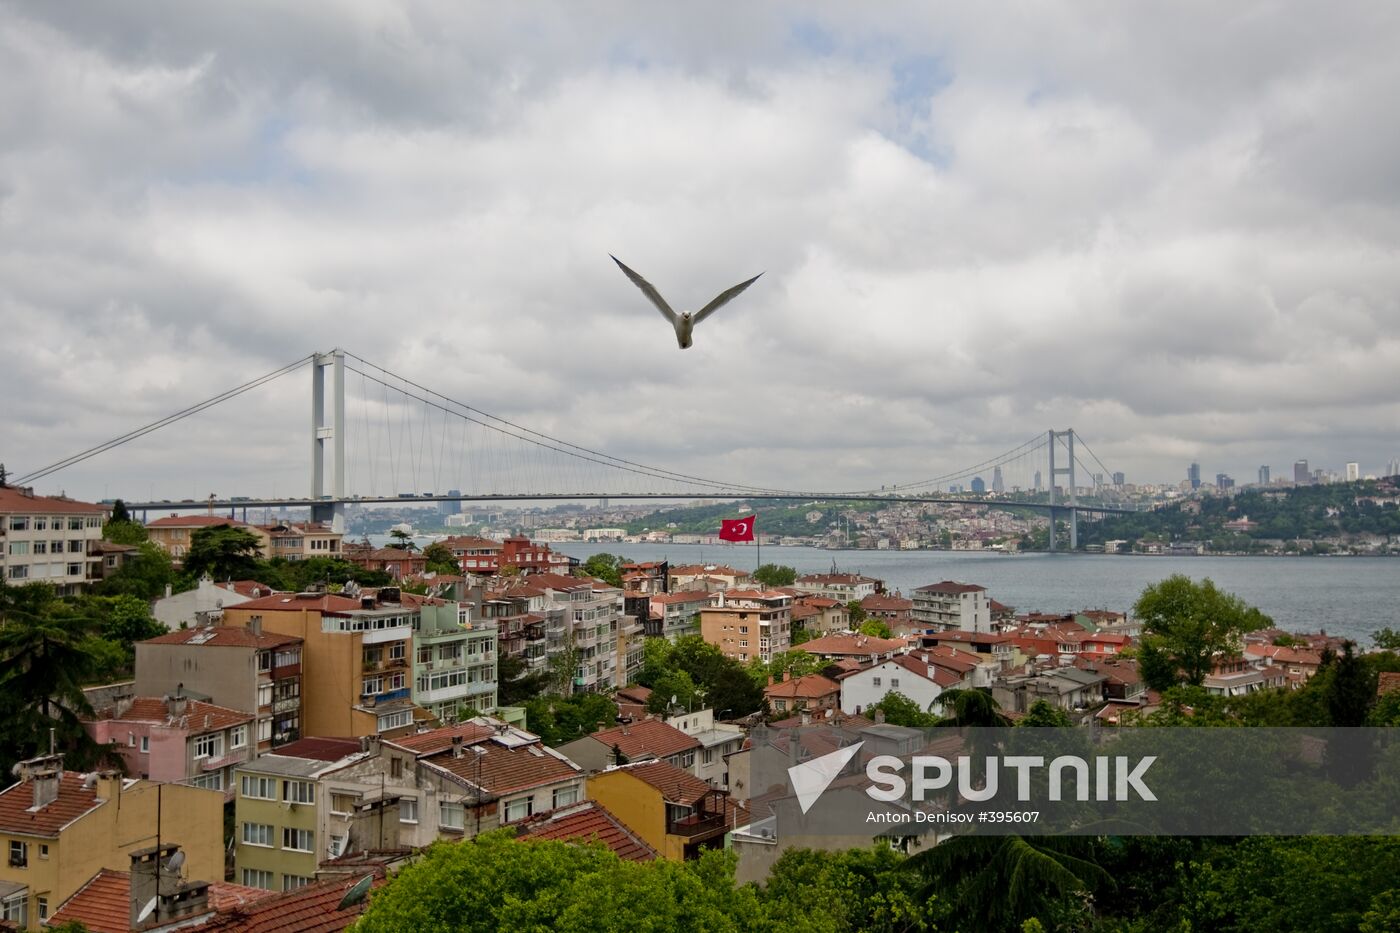 Sights of Istanbul